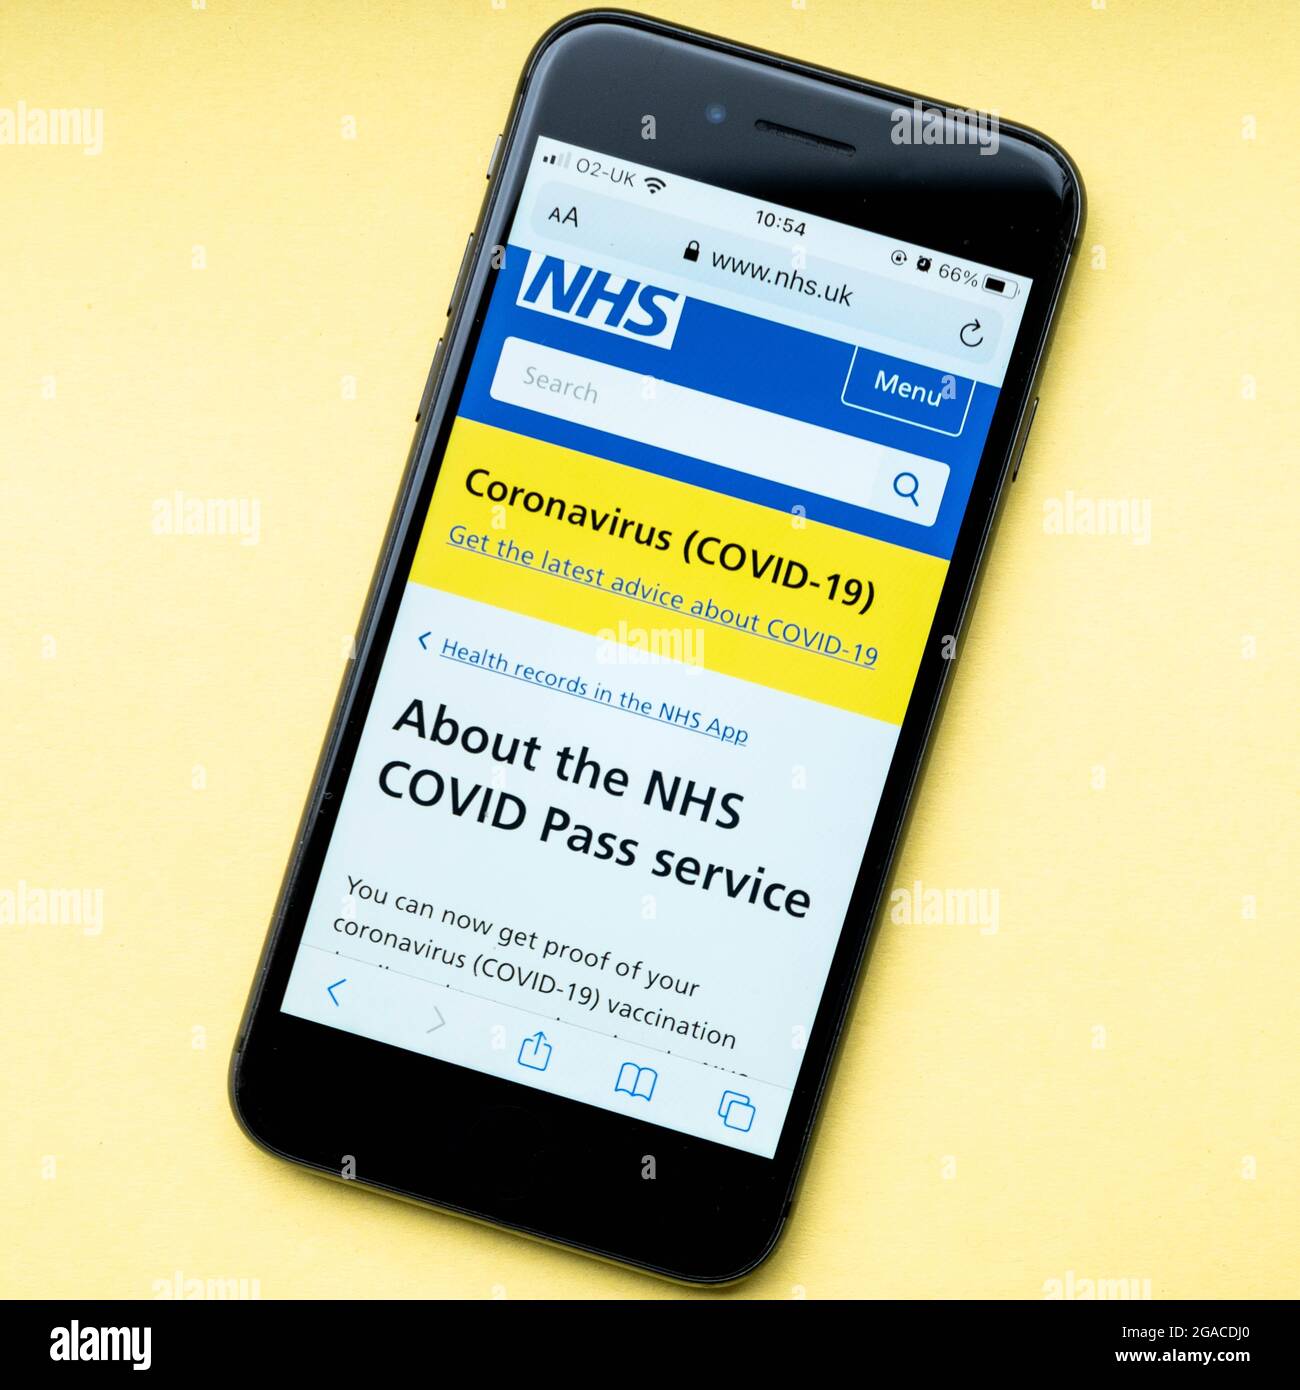 London UK, July 30 2020, Mobile Phone Or Smartphone Screen Shot About the NHS Covid Pass Service With No People Stock Photo